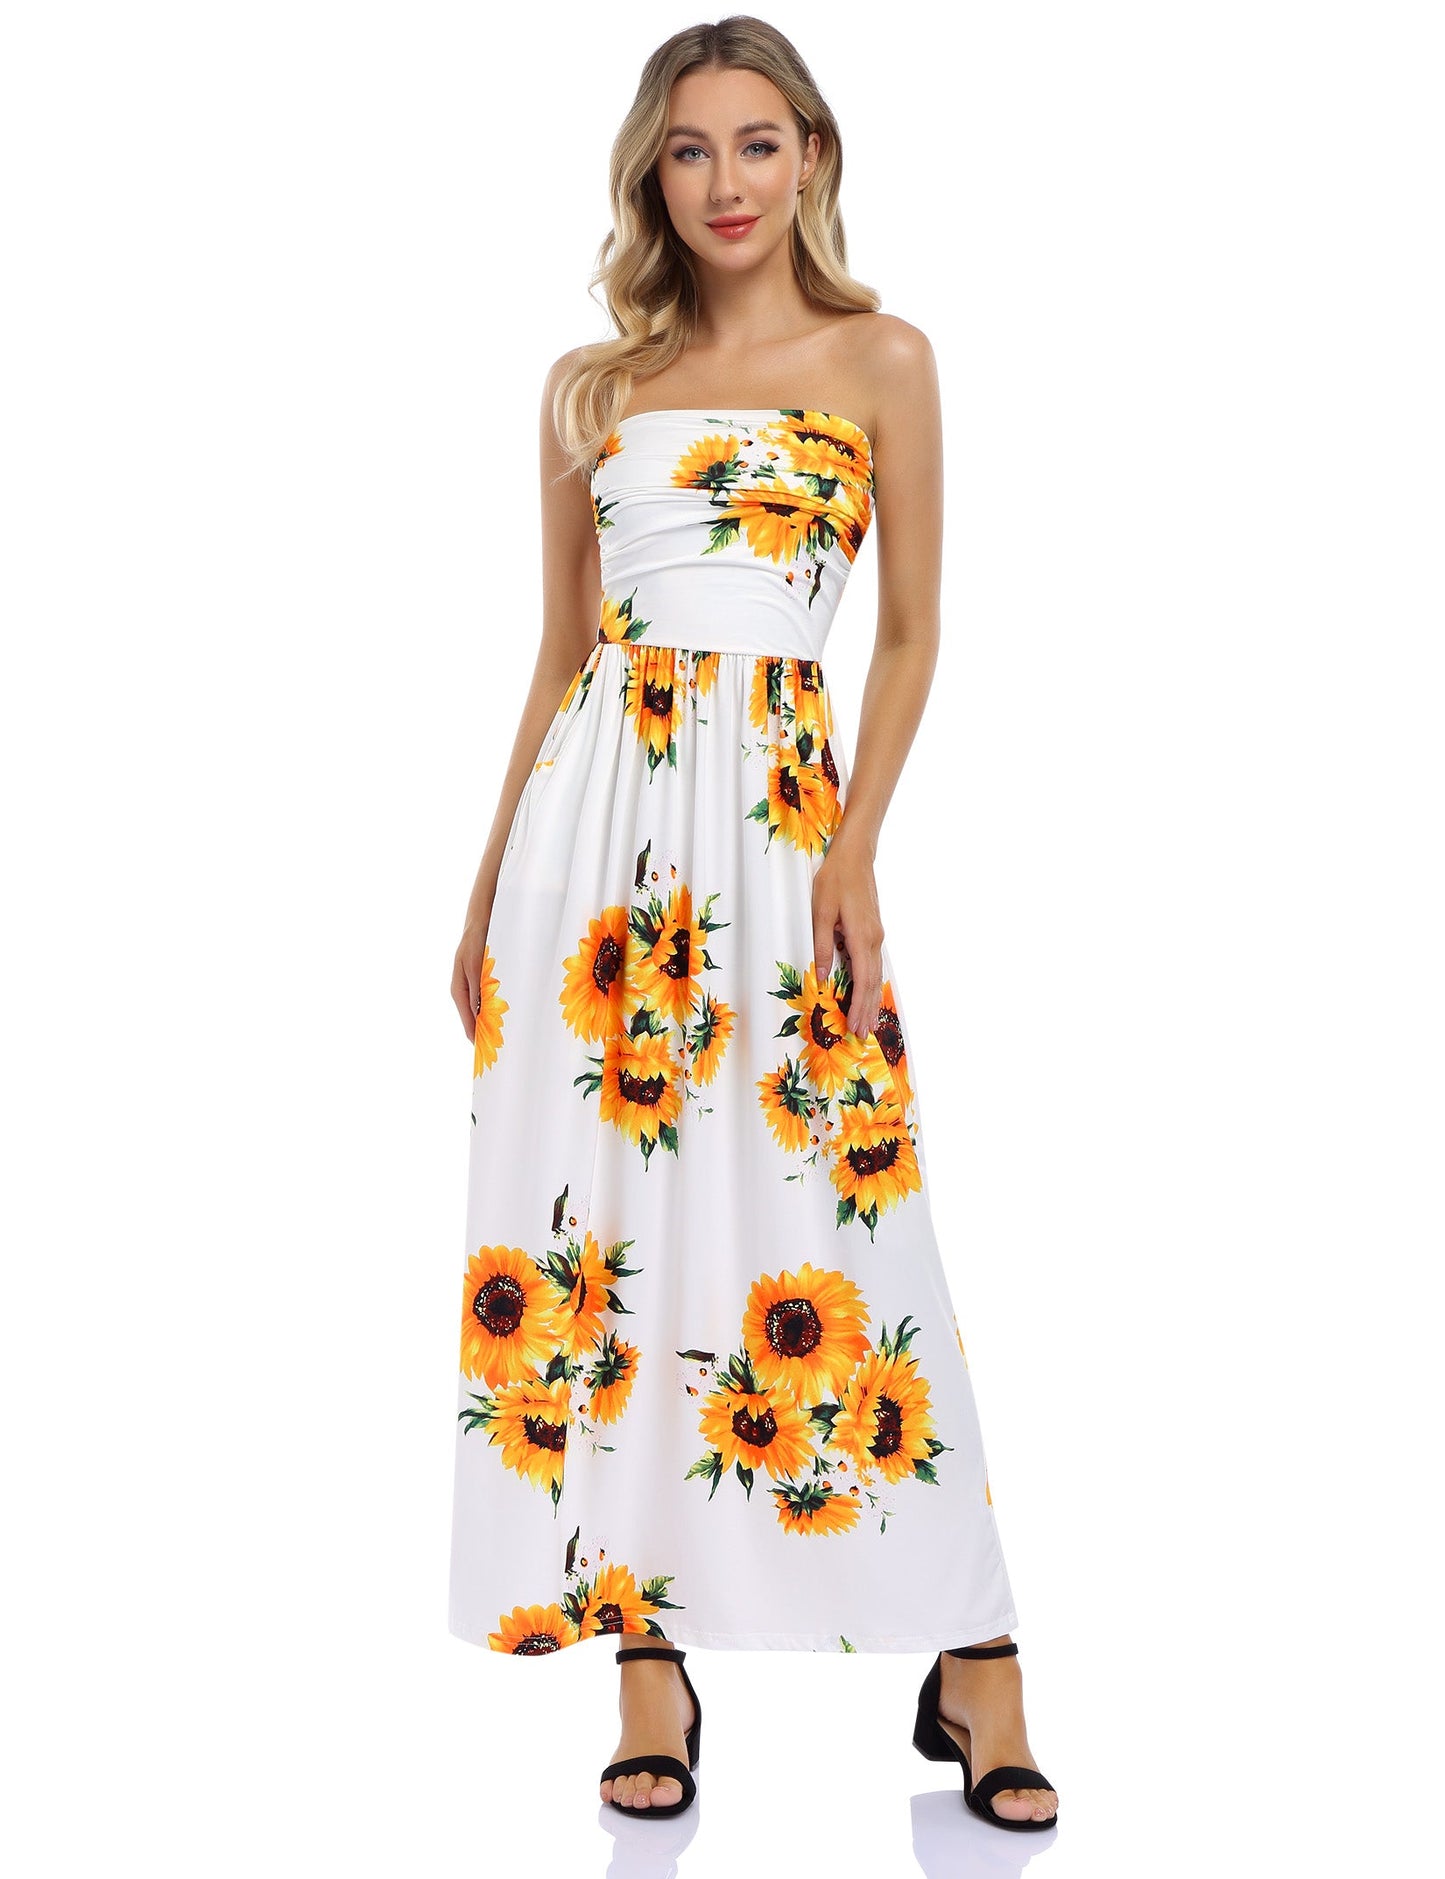 YESFASHION Women's Strapless Graceful Floral Party Maxi Long Dress Orange Pink